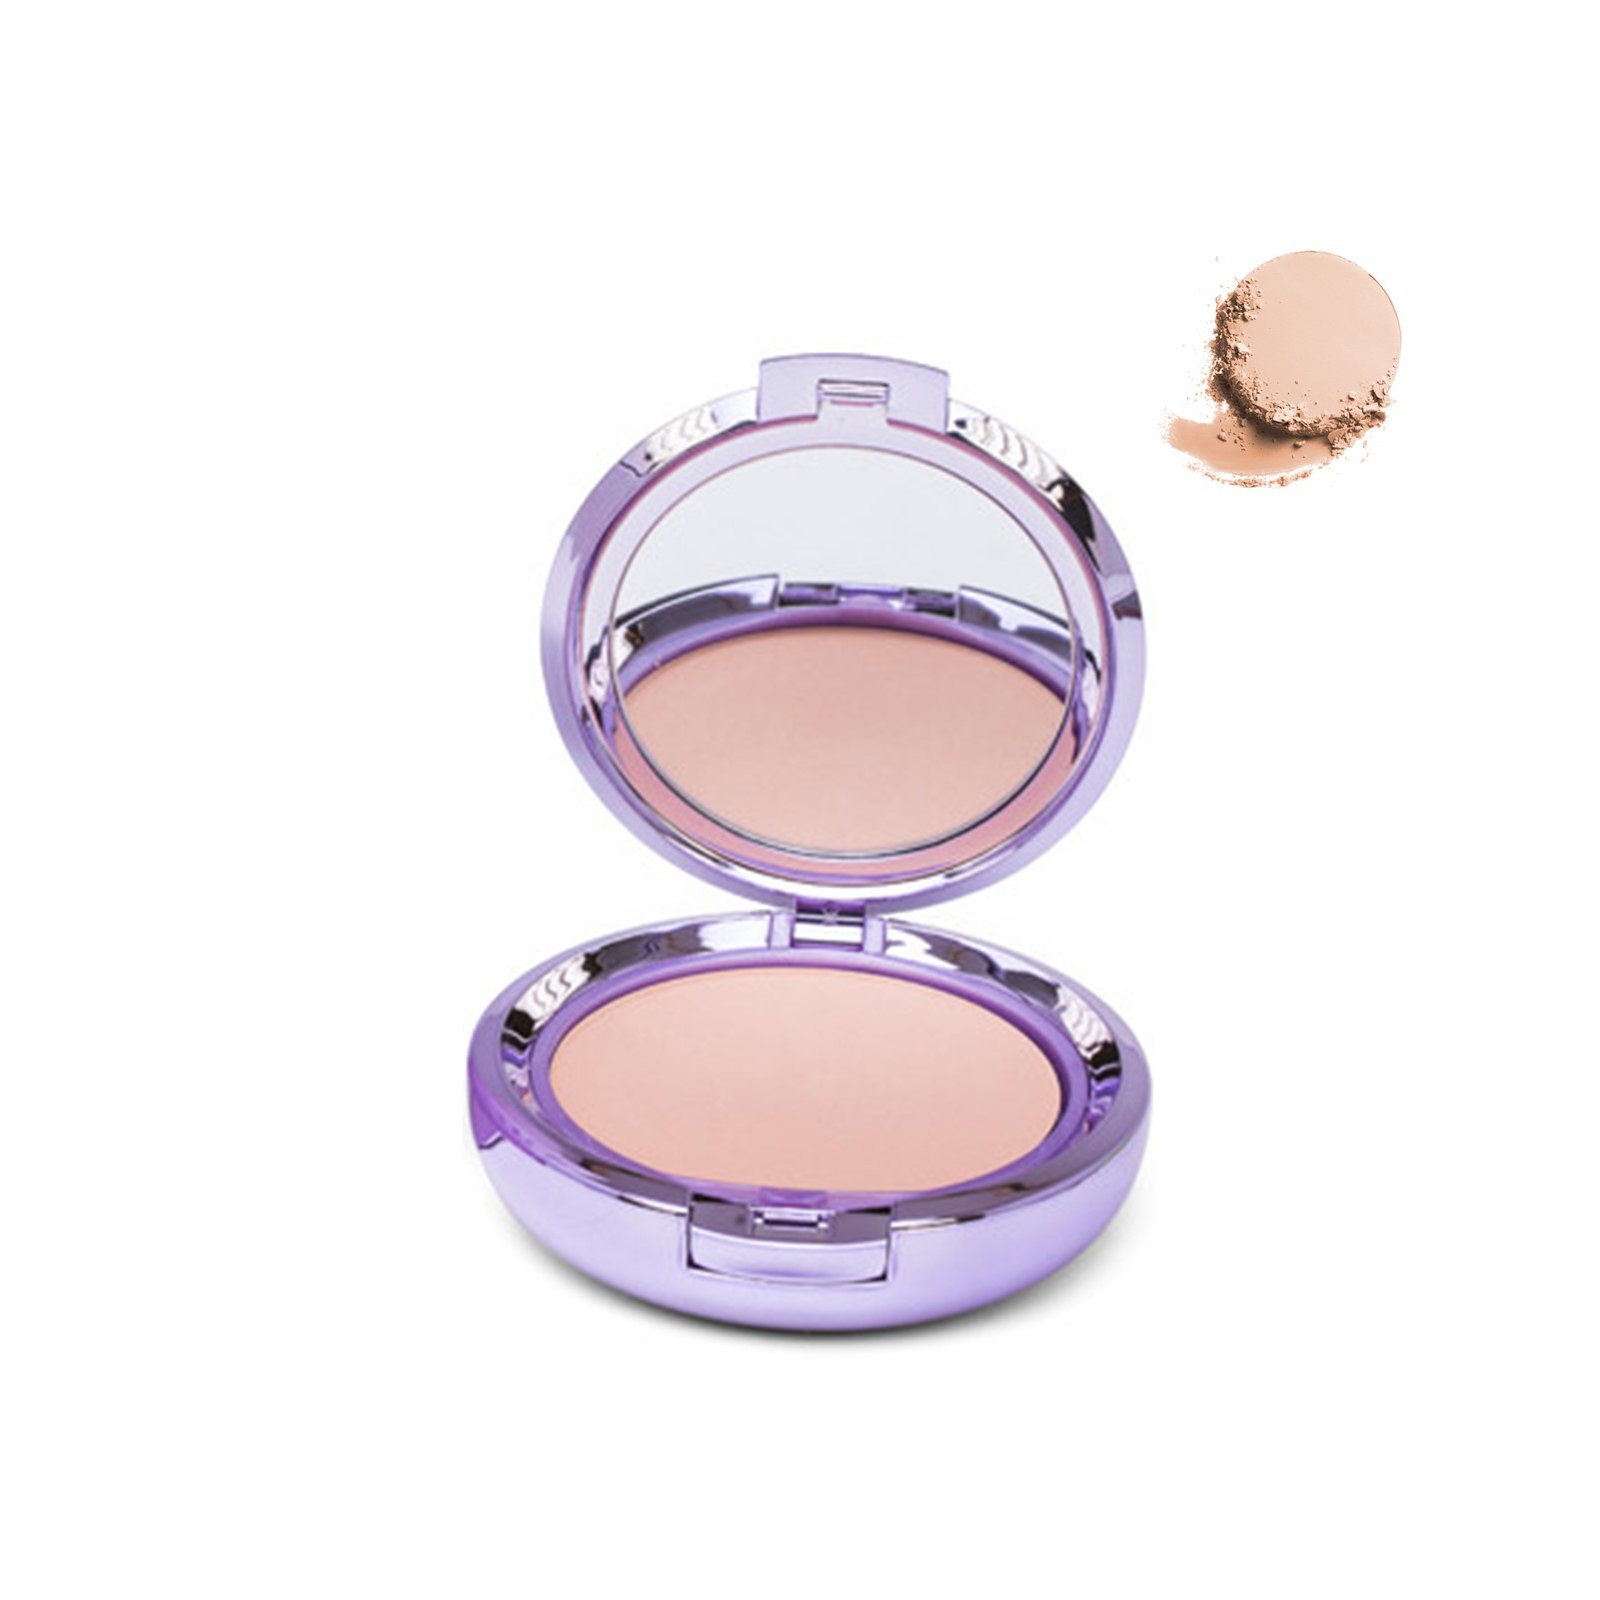 Covermark Compact Powder Oily-Acneic Skin 4 10g